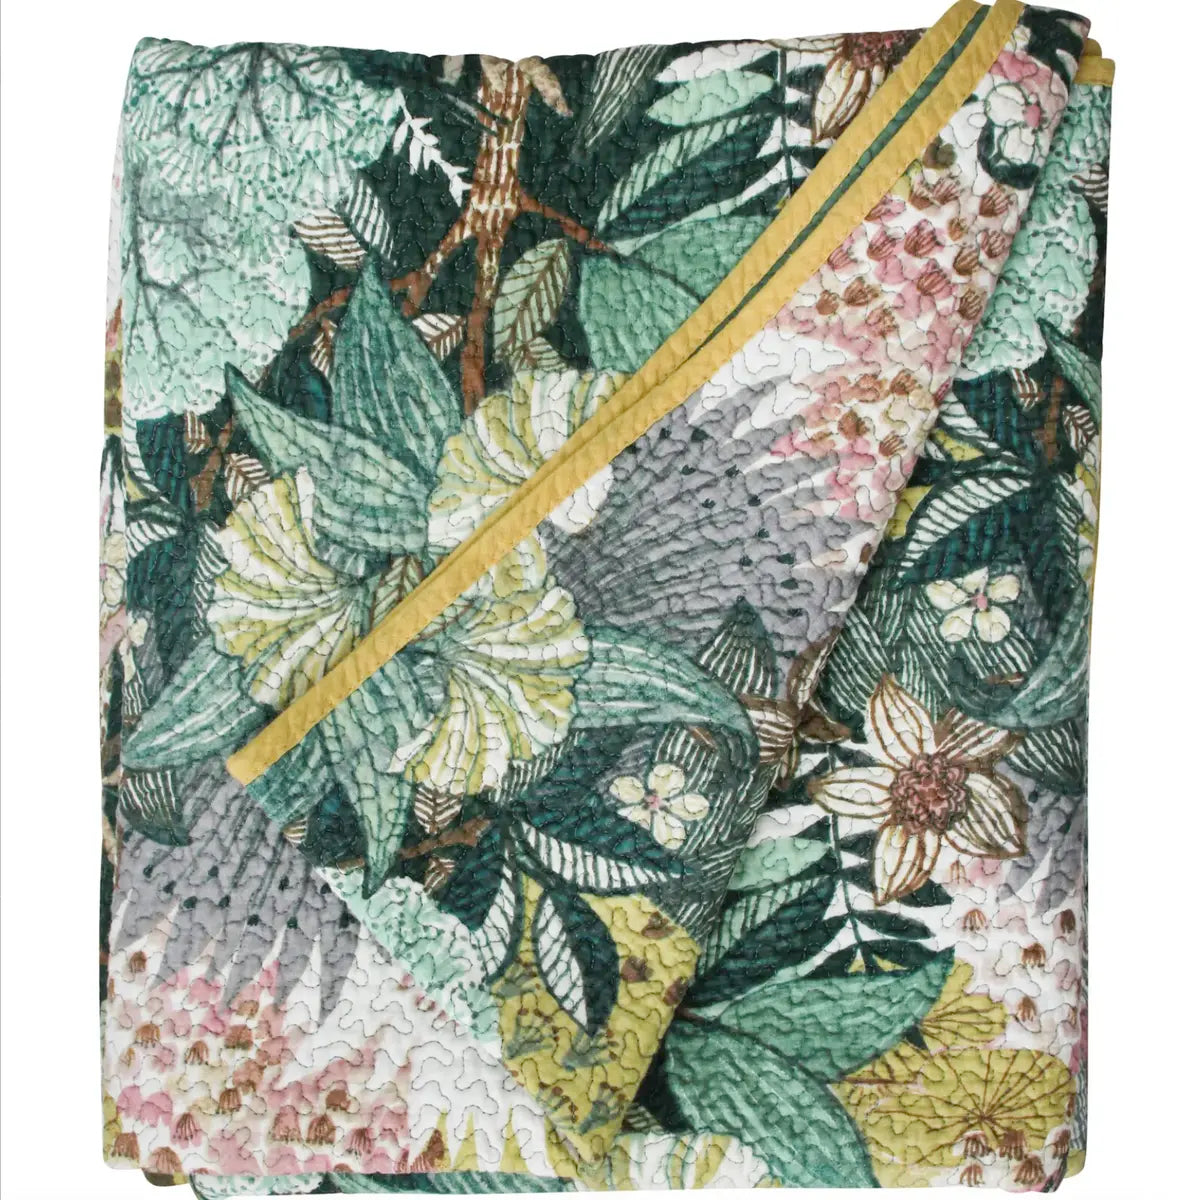 A LaVida Quilted Bedspread - Jungle Flowers with a jungle flower and leaf pattern.